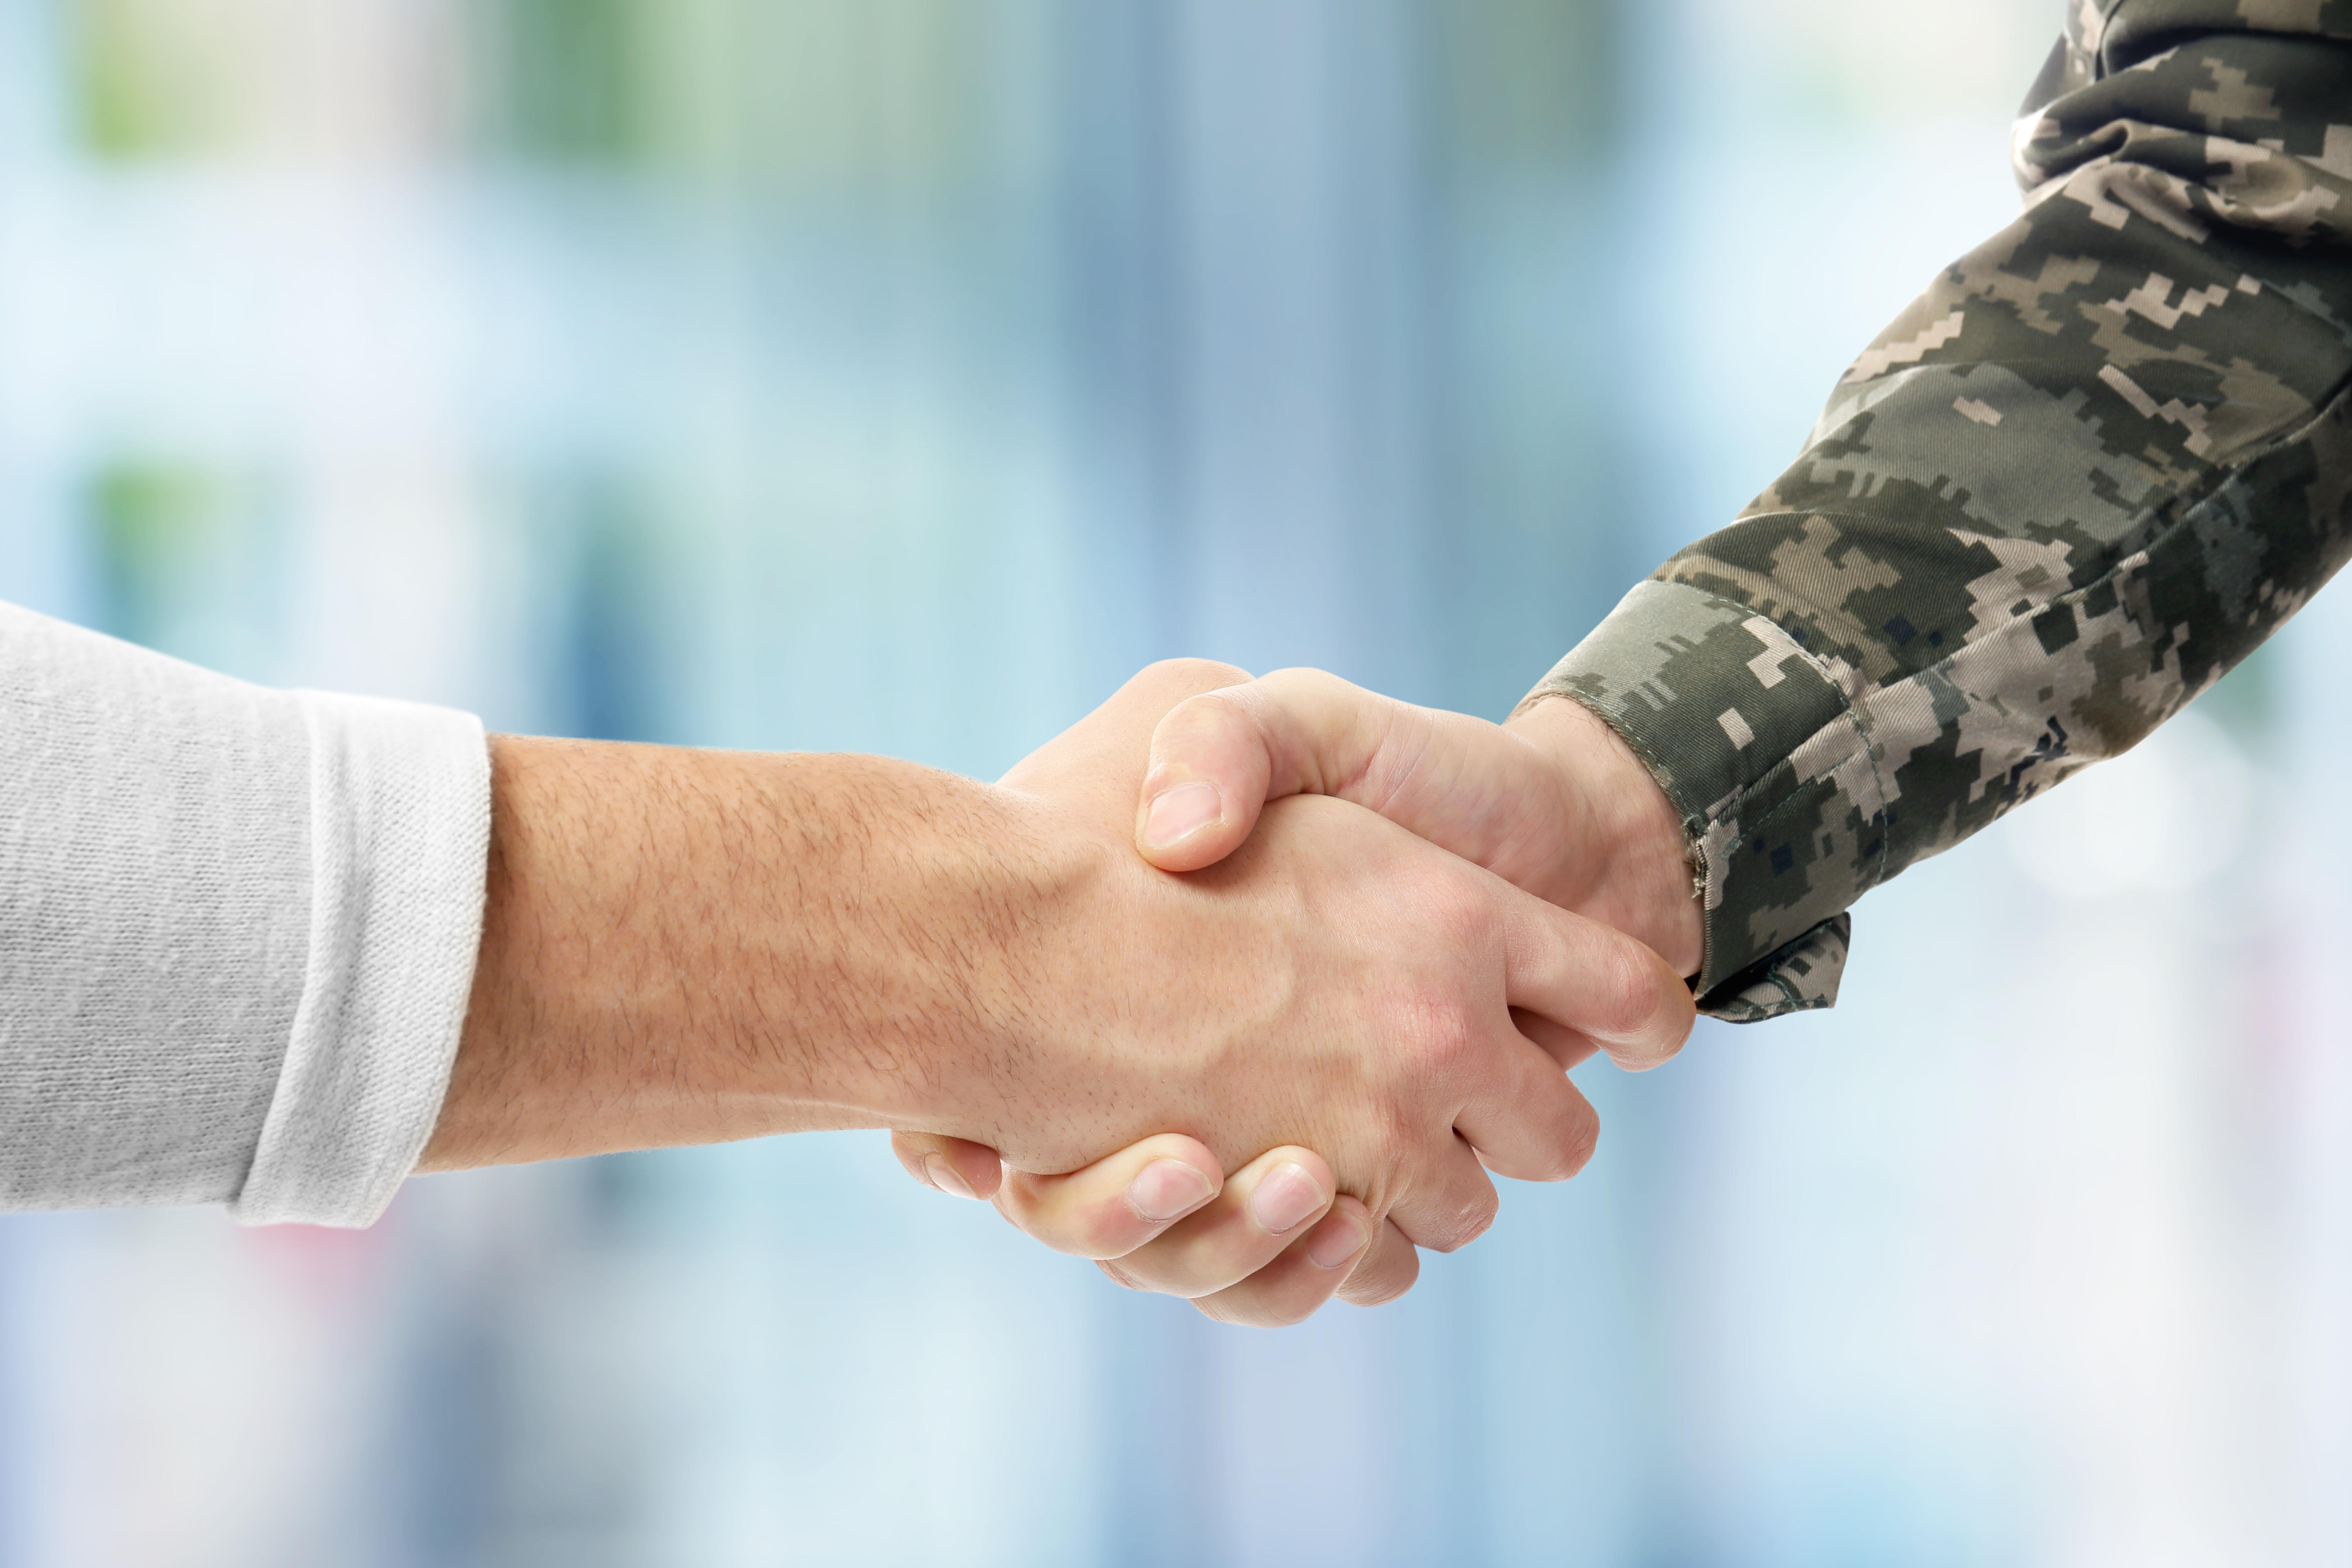 A handshake, with one person wearing military fatigues